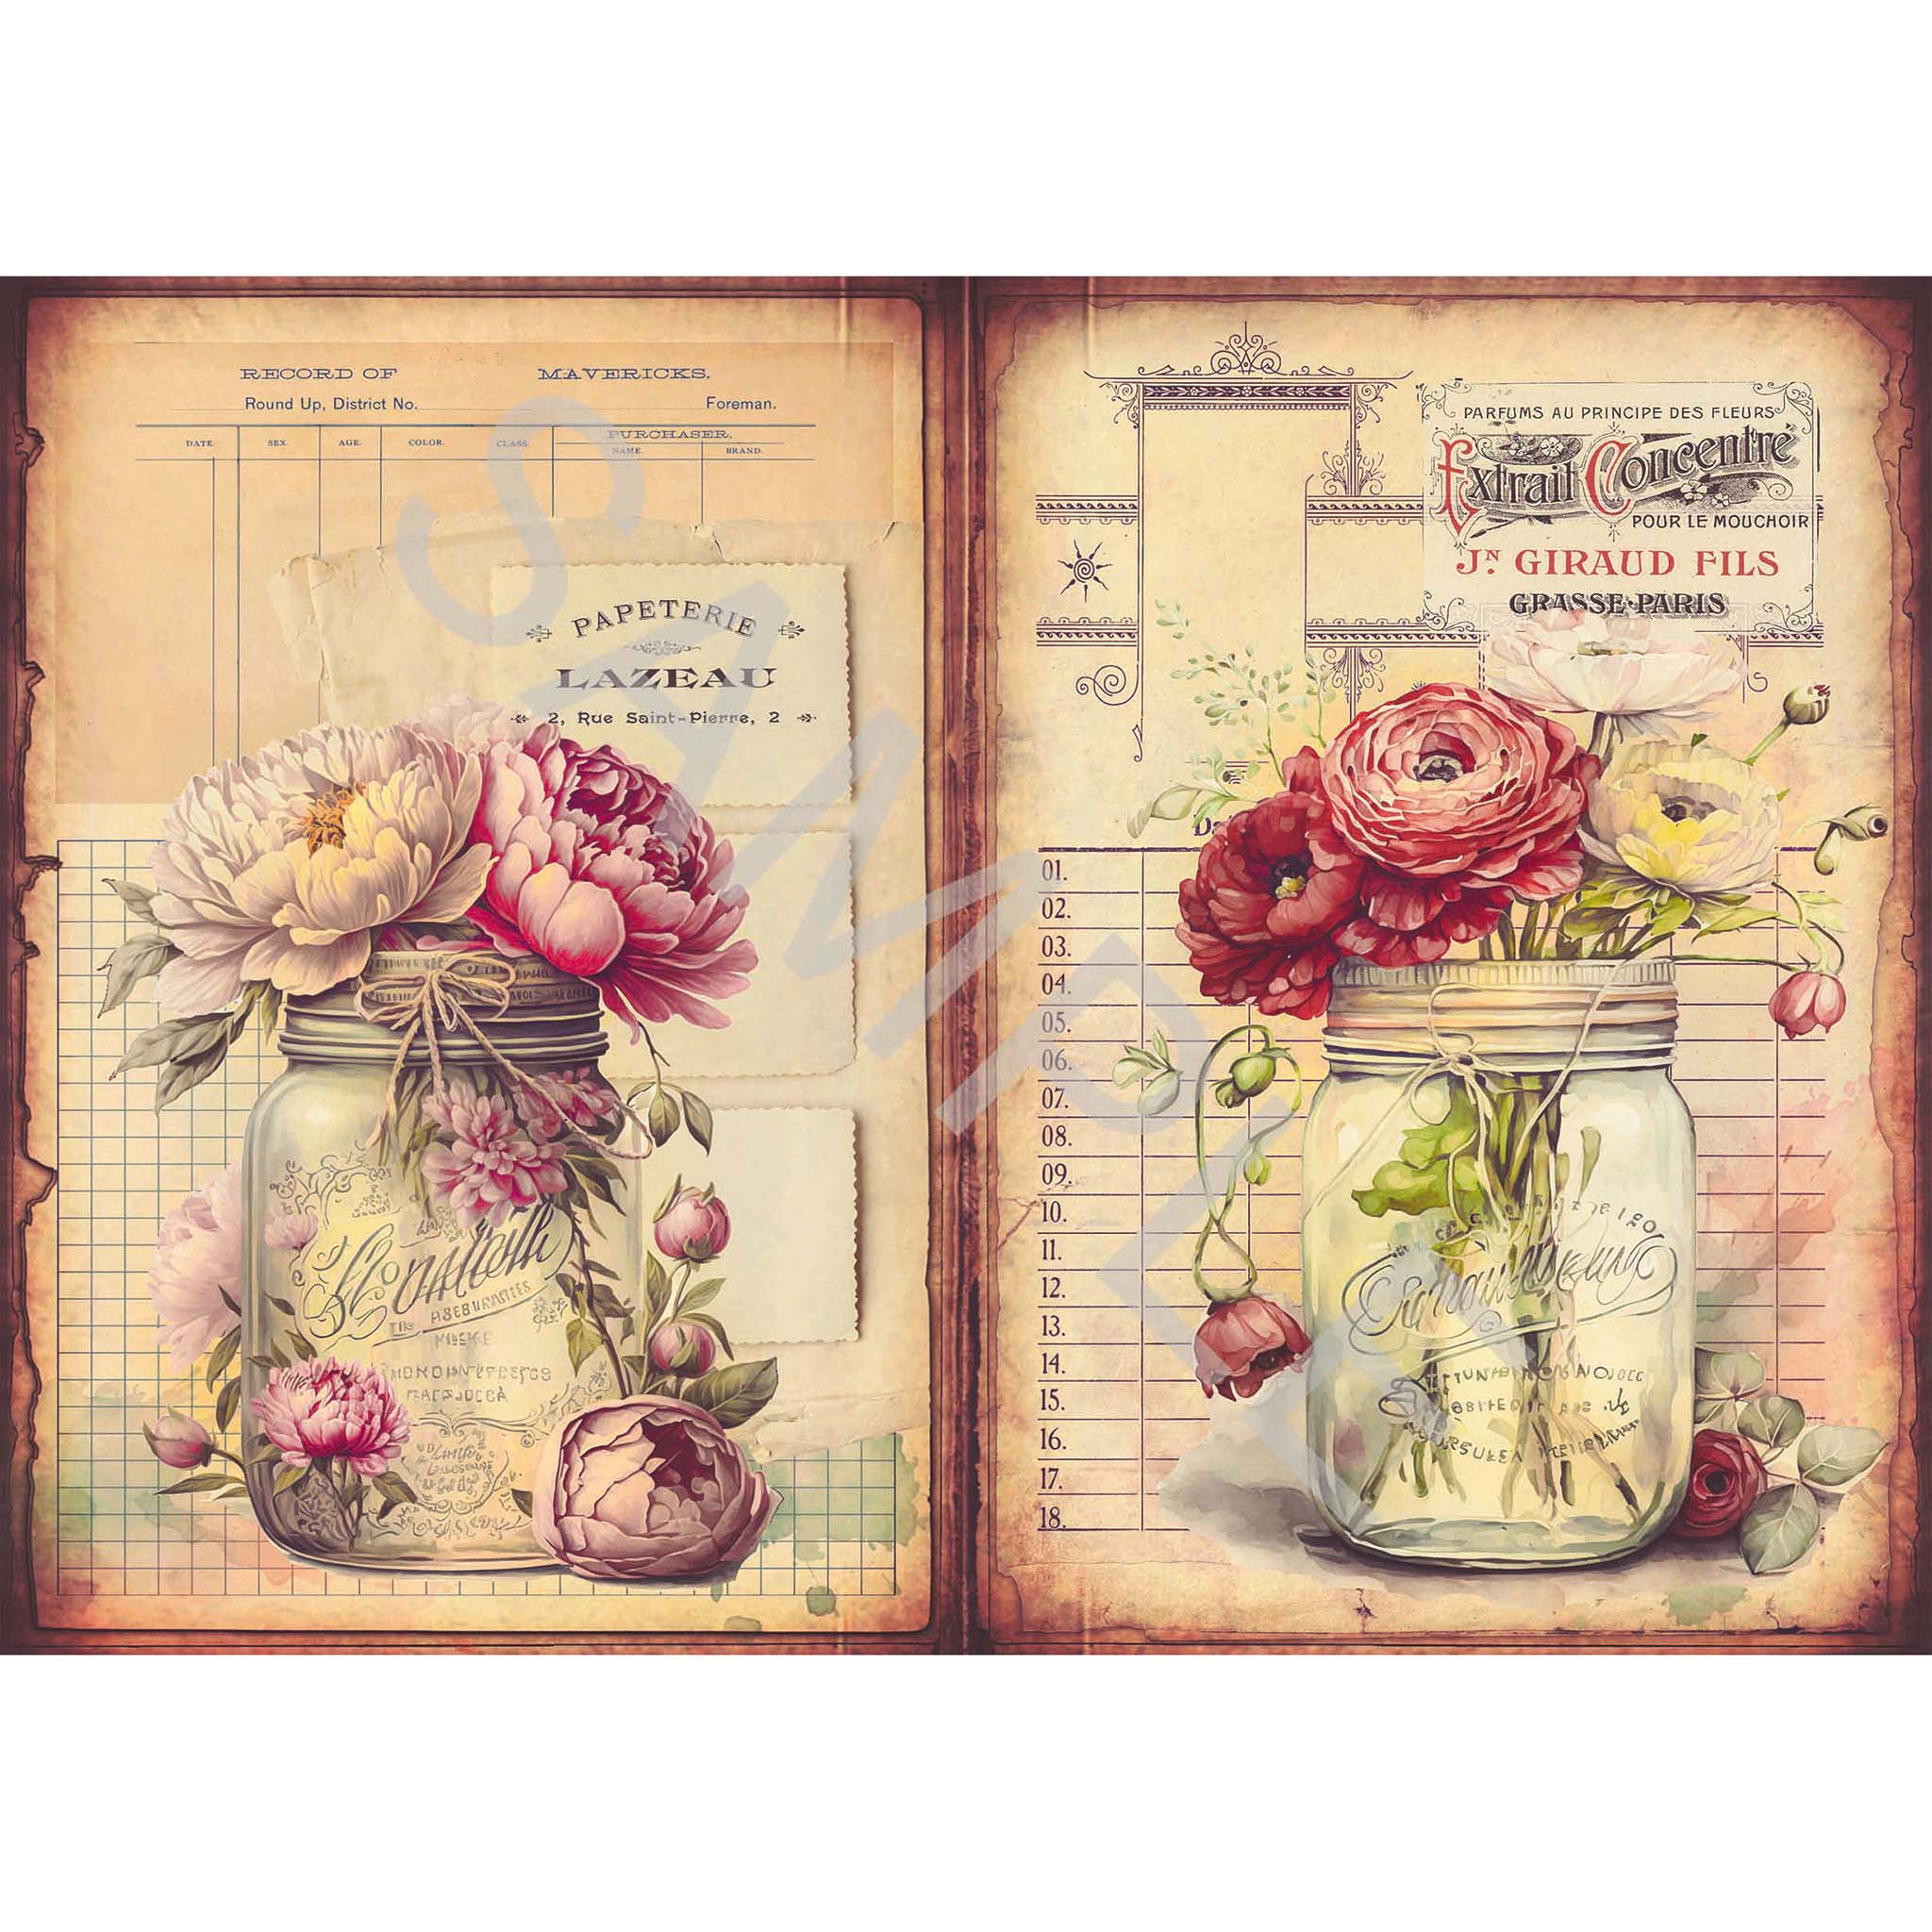 A4 rice paper that features two charming images of flowers in mason jars against vintage documents. White borders are on the top and bottom.